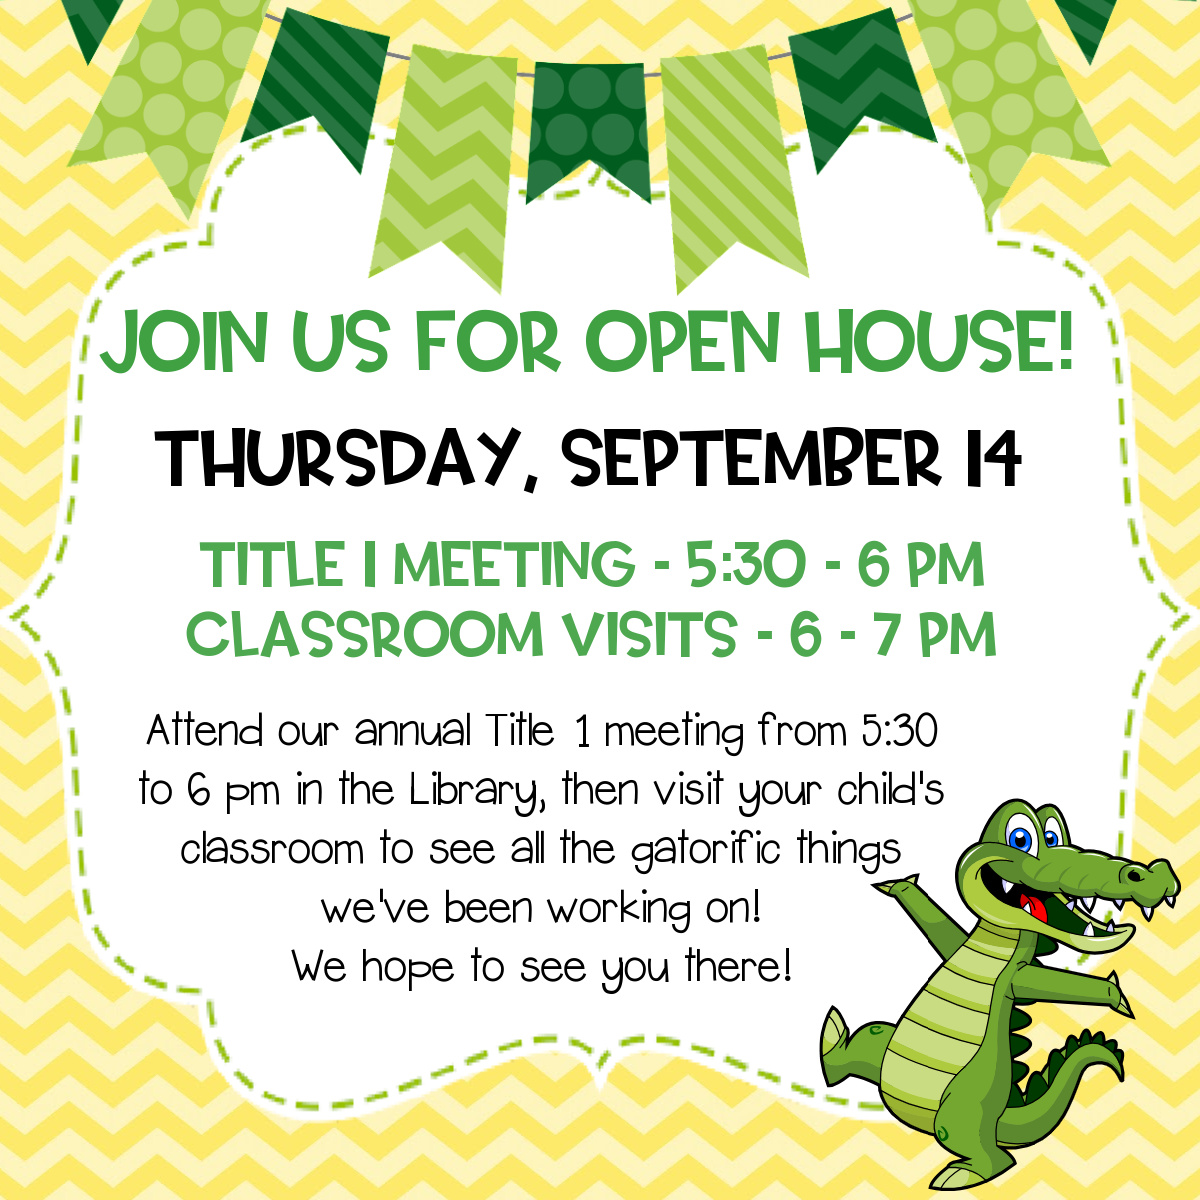 Tomorrow is the big day... Open House is Thursday, September 14! Join us for the Title 1 meeting in the library from 5:30 to 6 pm, then visit your gators' classrooms from 6-7 to see all the gatorific things they've been working on! See you there!!